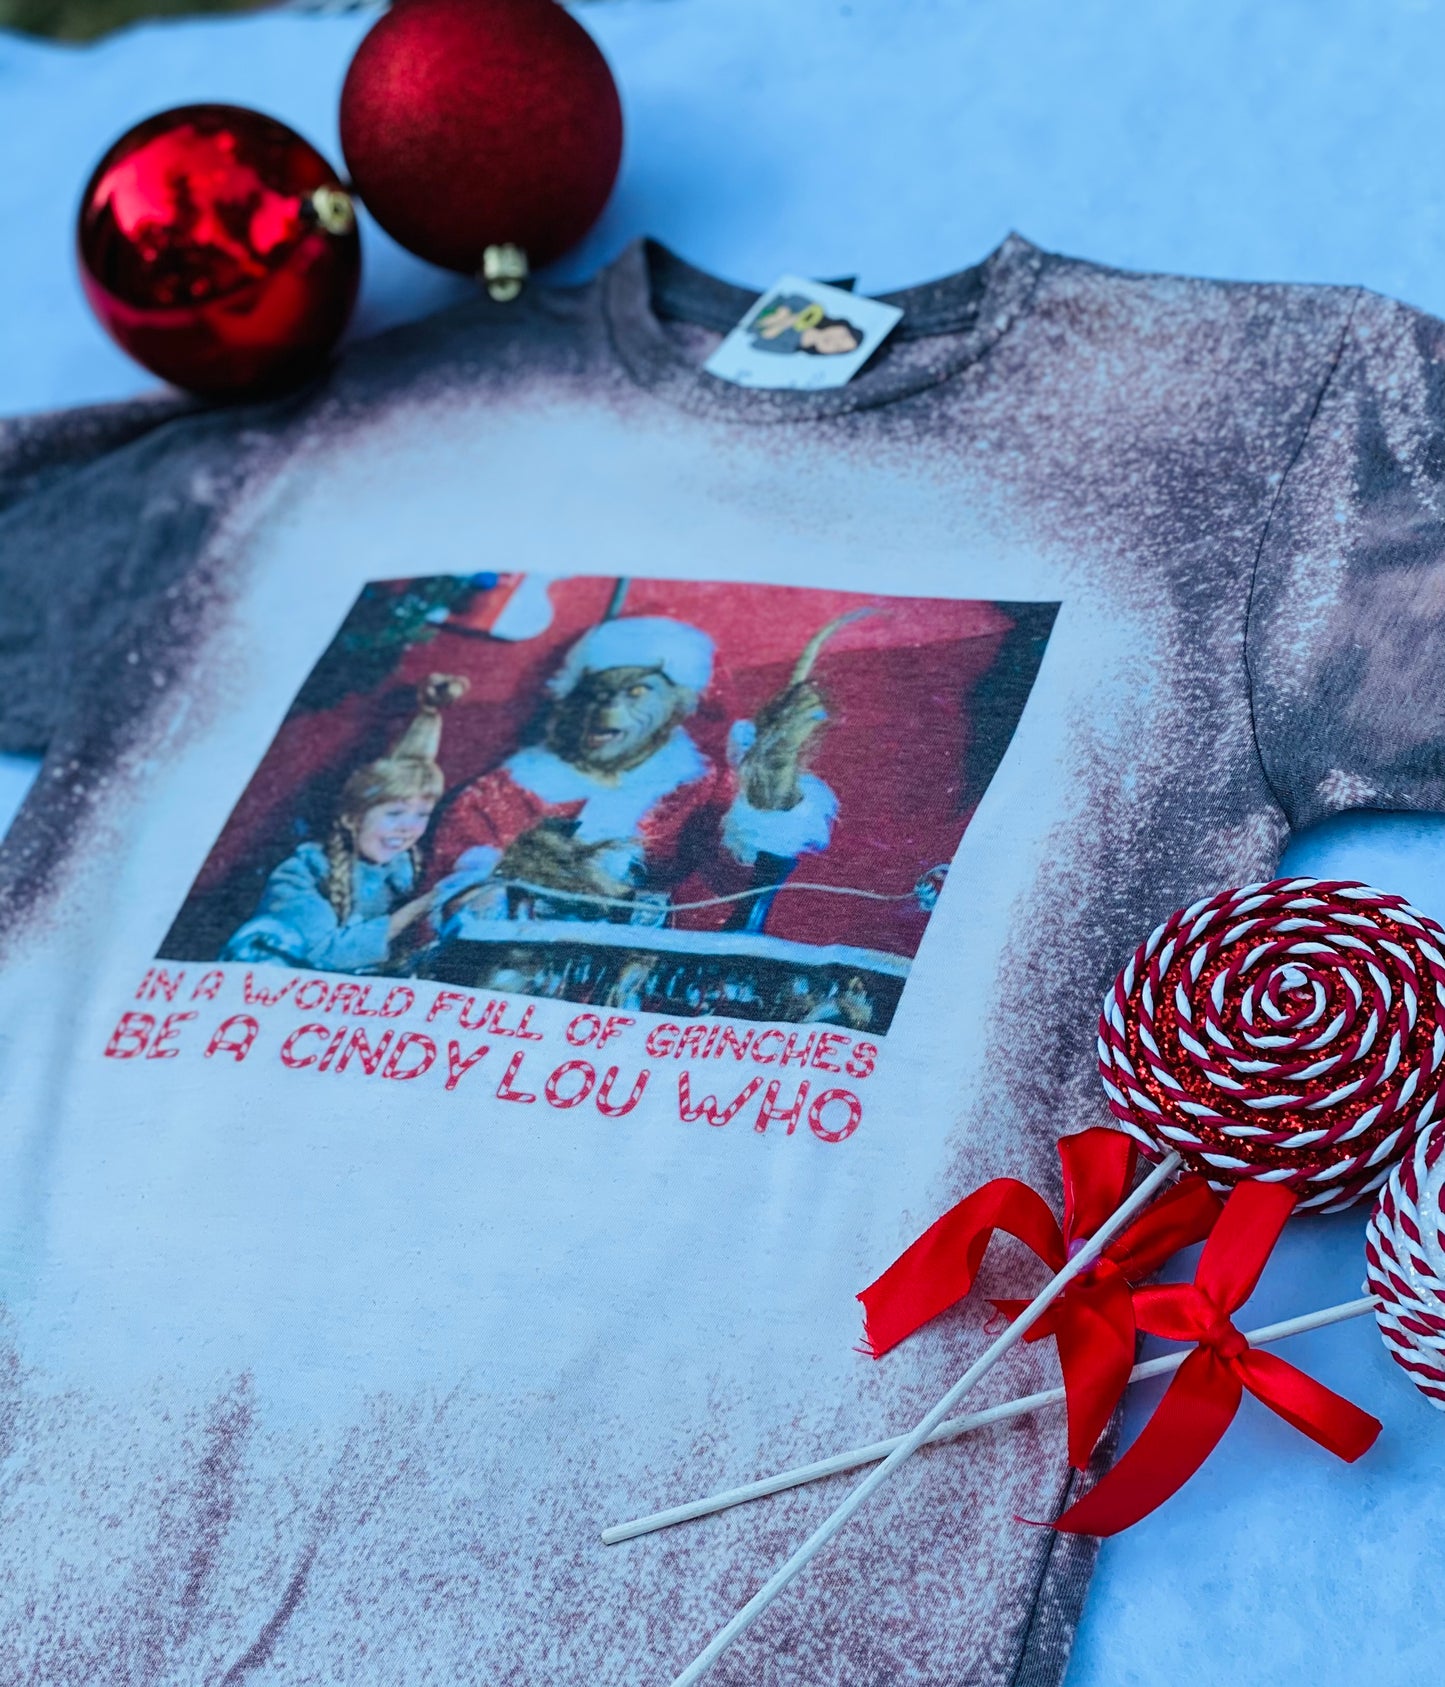 The Grinch Shirt- In a world full of Grinches, be a Cindy Lou Who